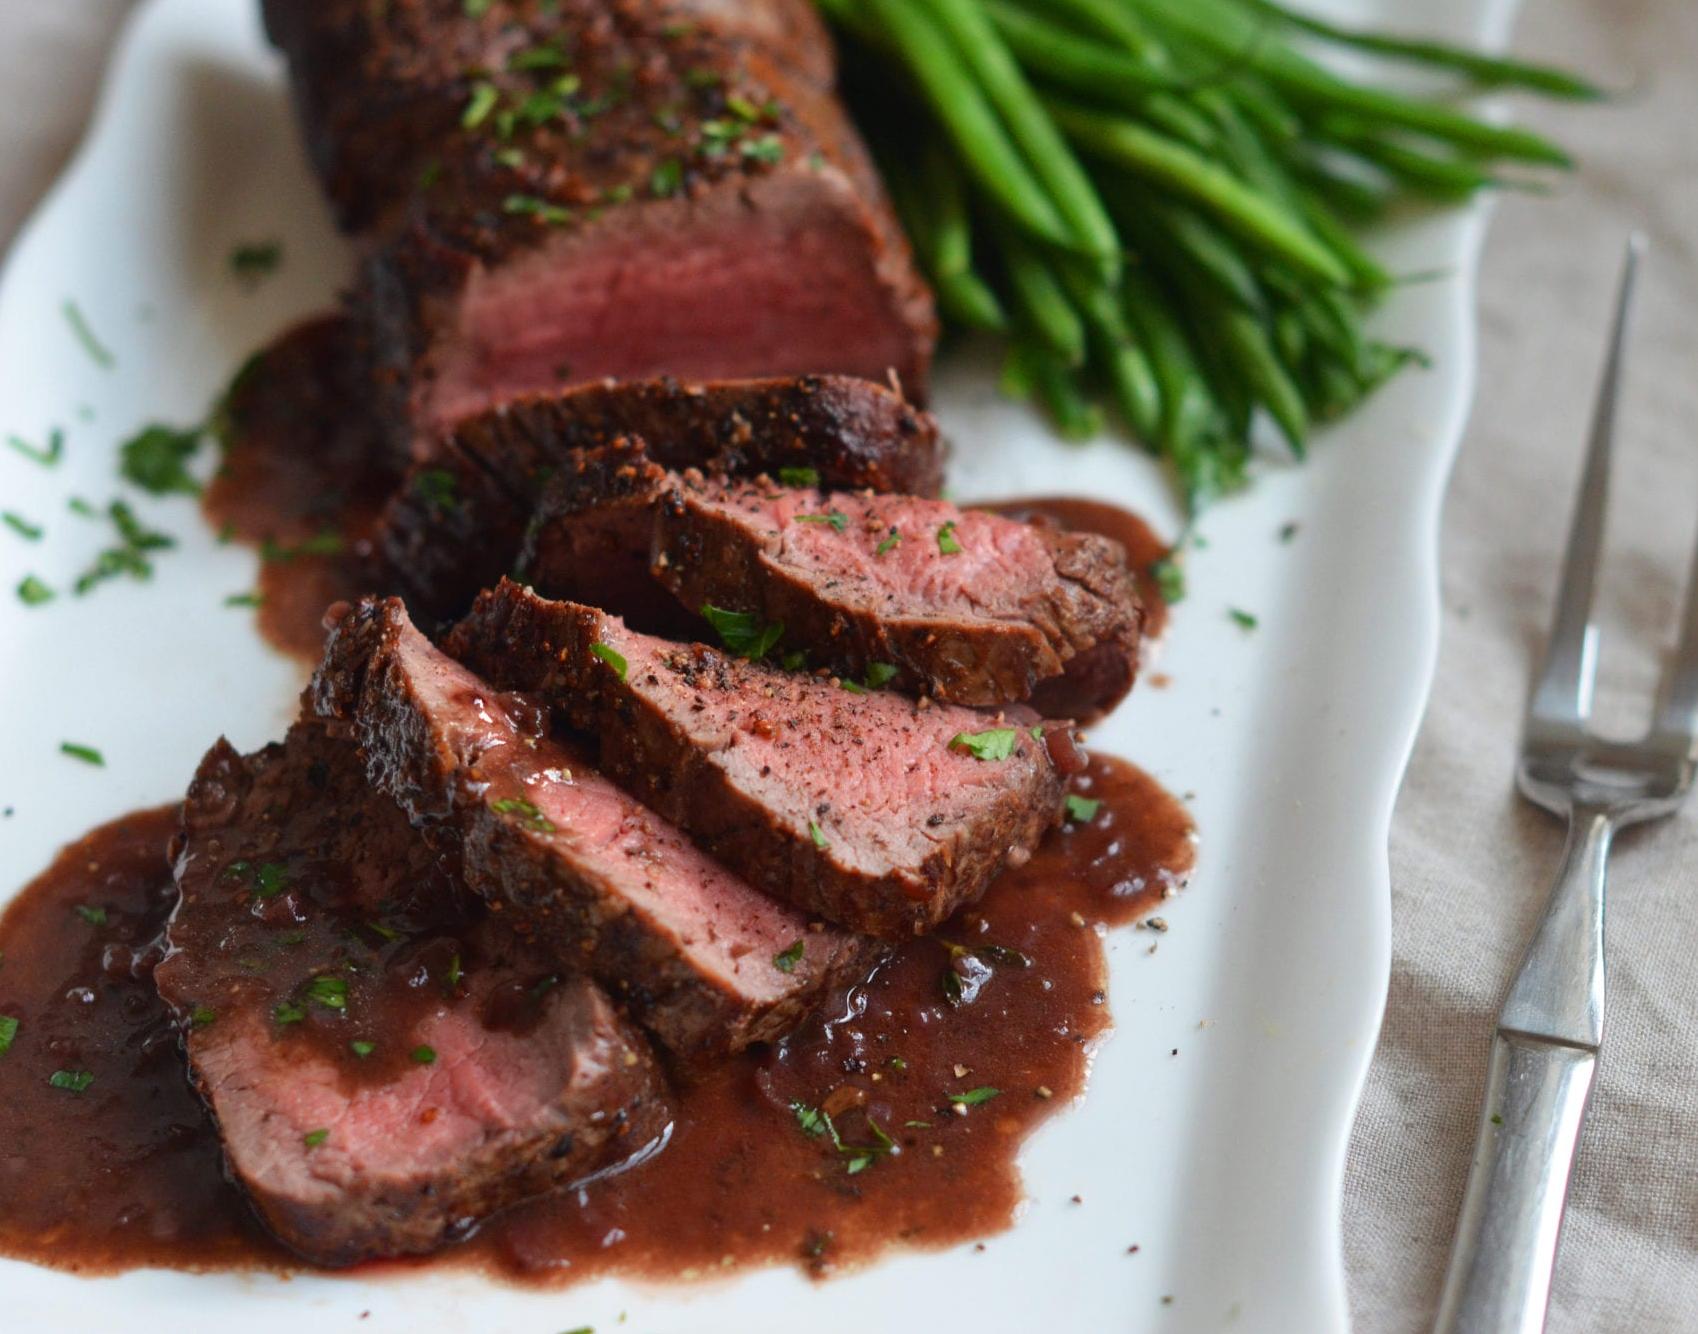  Satisfy your cravings with this delicious roast beef tenderloin